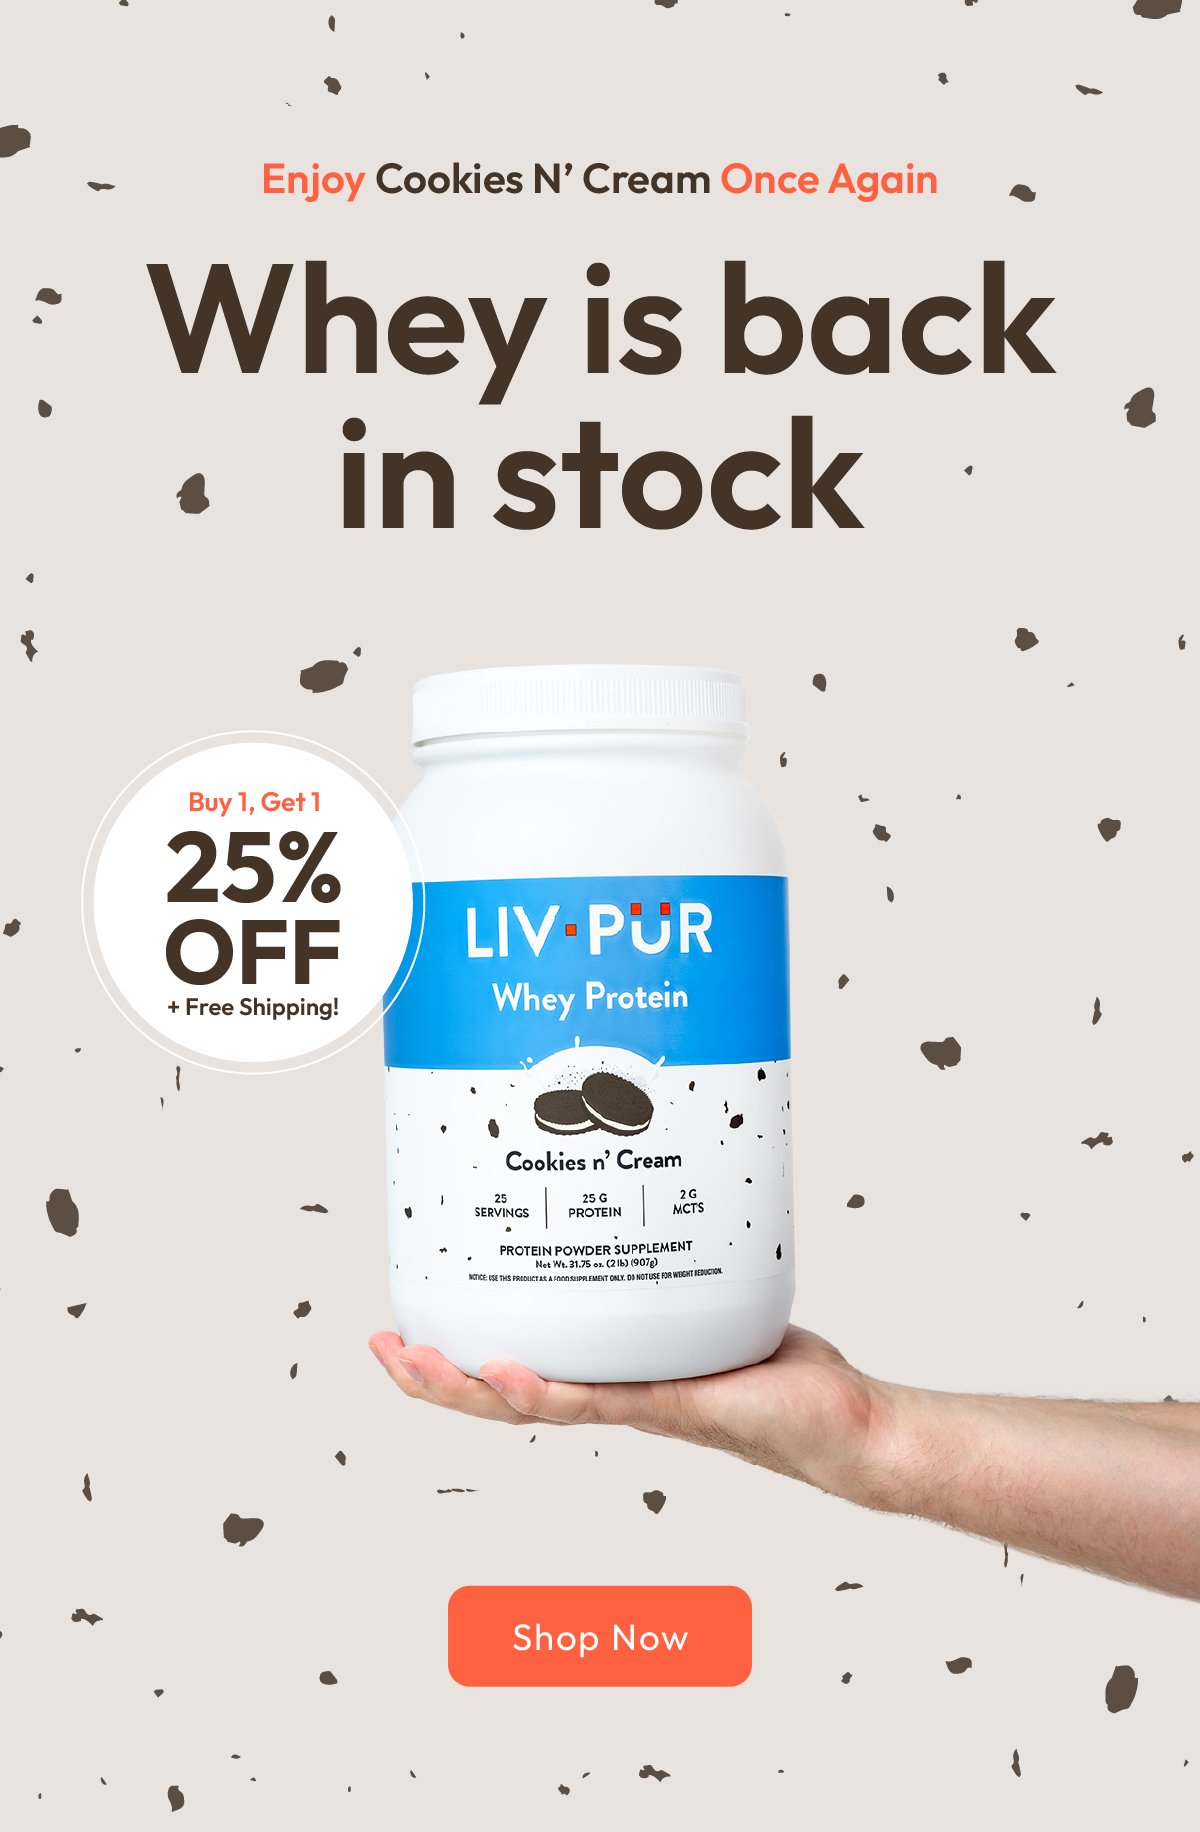 Whey protein is now back in stock. Buy one, get one 25% off.